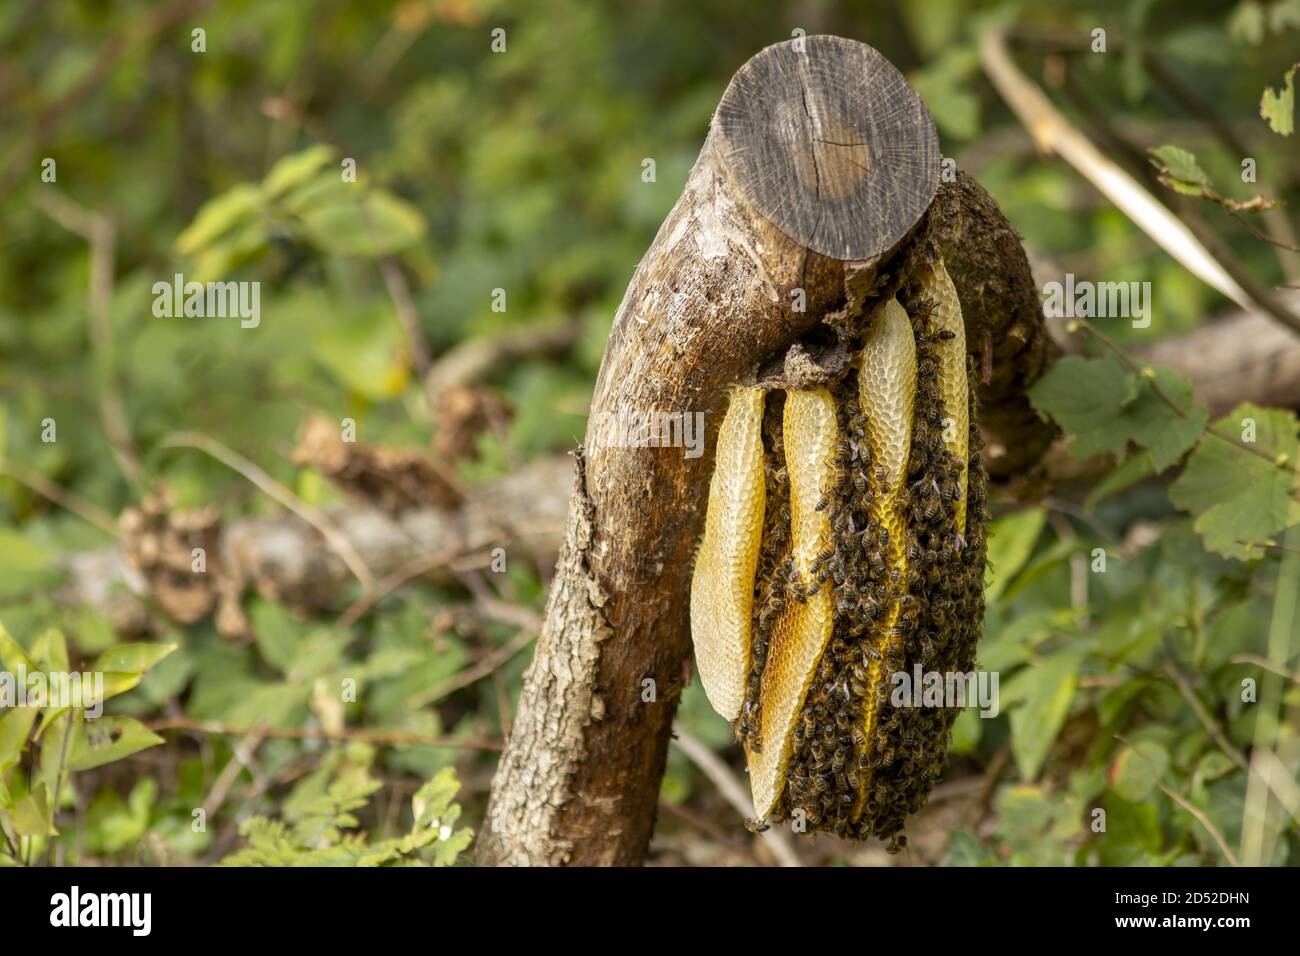 Bee hive honeycomb in natural surrounding Stock Photo